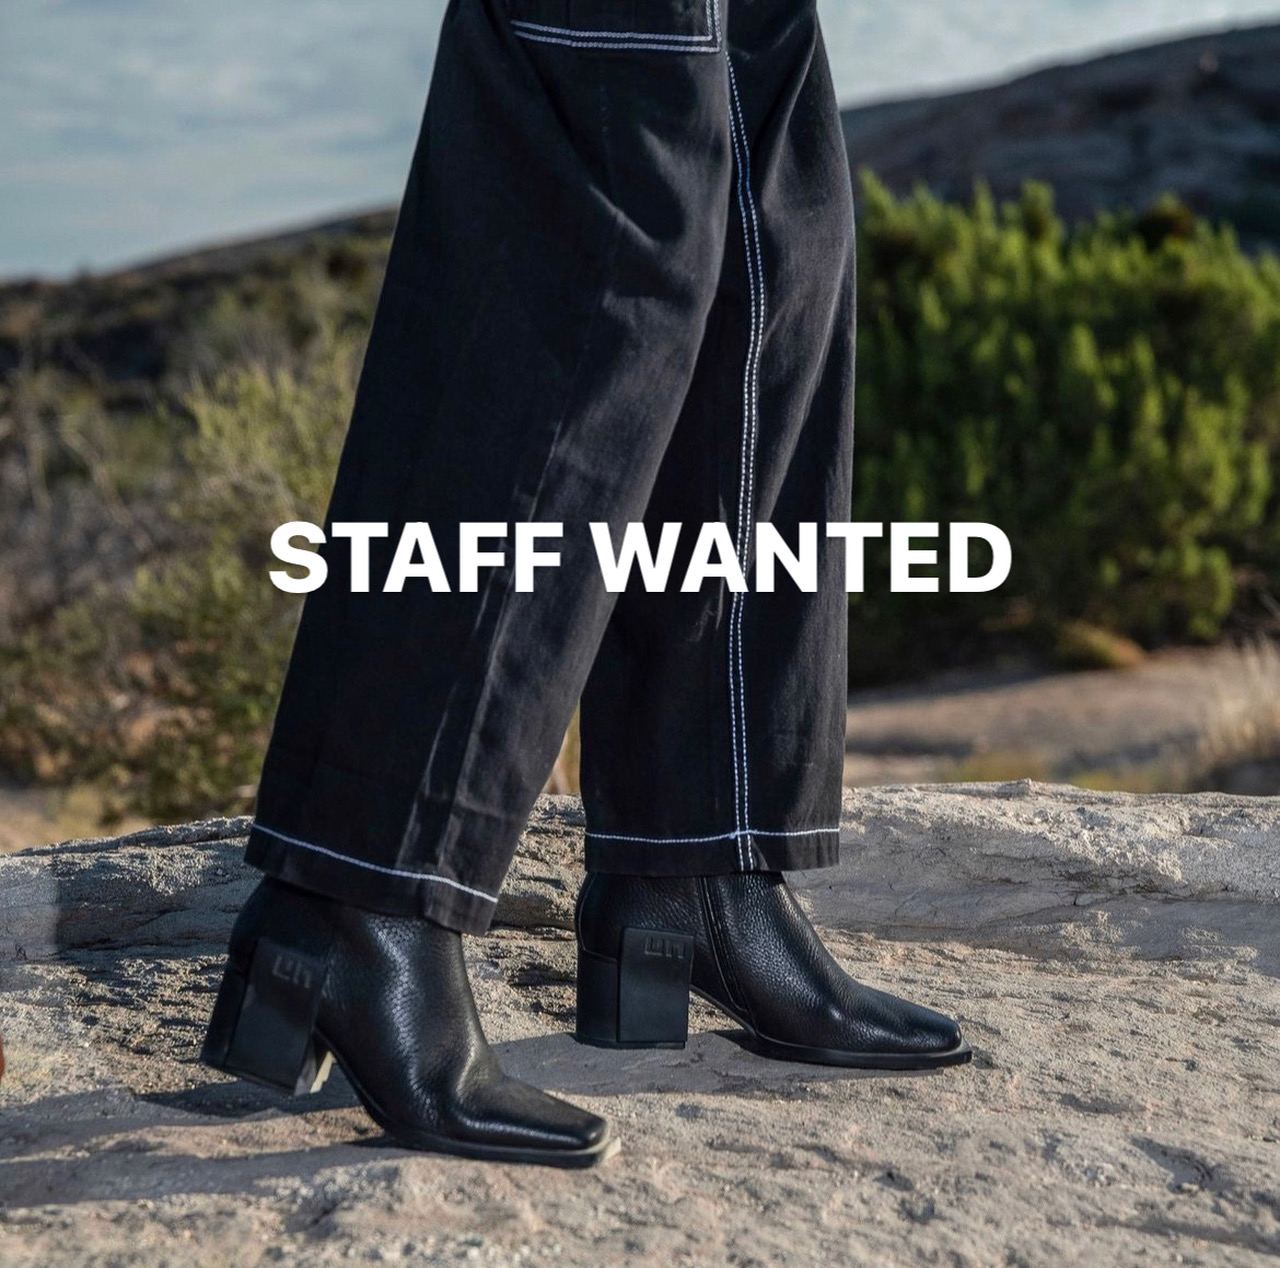 ［STAFF WANTED］